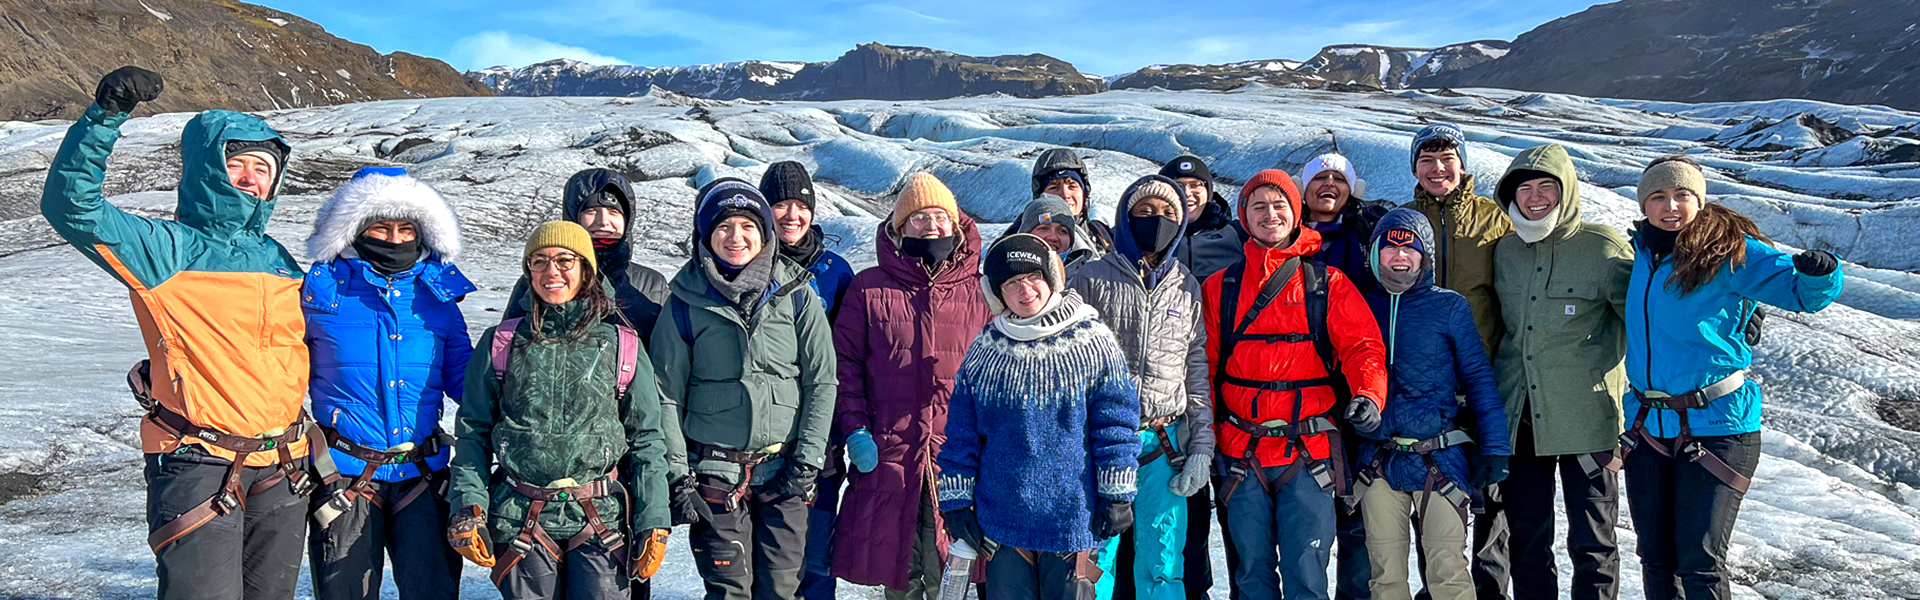 Students in Iceland as part of the GREEN program spring break study